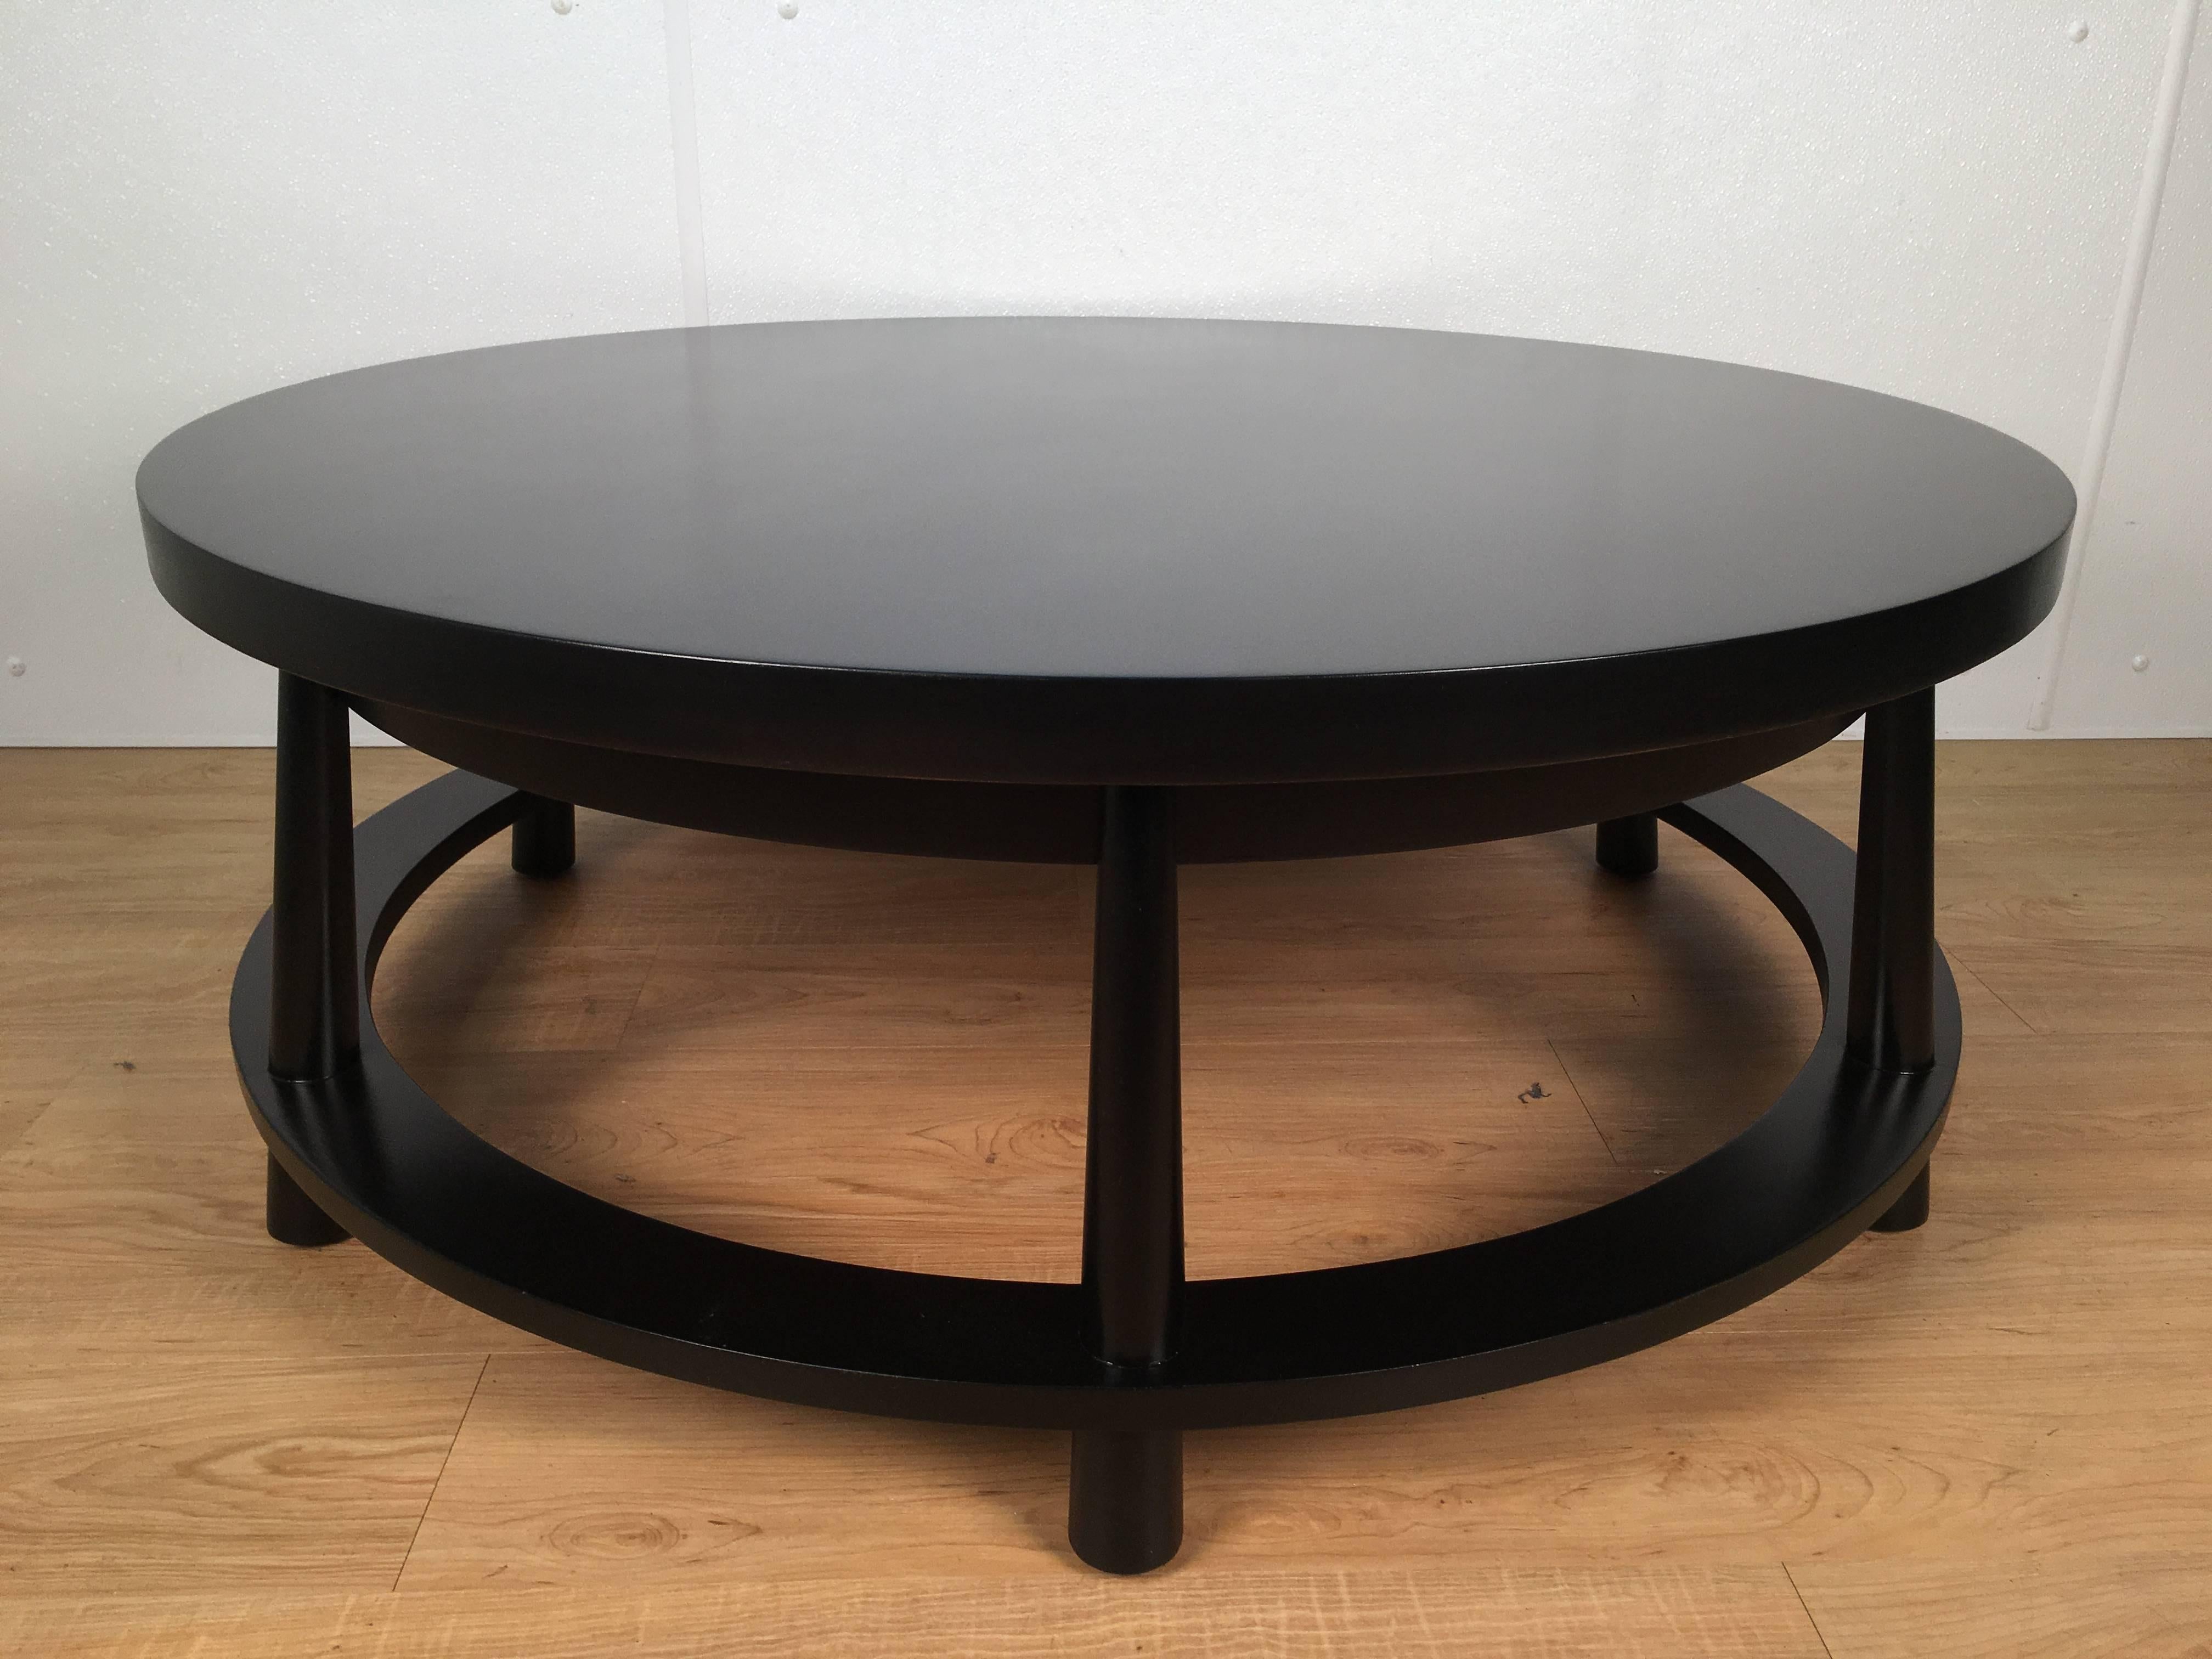 Rare ebonized two-drawer round cocktail table by T.H. Robsjohn-Gibbings for Widdicomb. All around ebonized wood with two concealed drawers. Last image is a original 1951 Widdicomb ad showing this table. We also have a pair of the 1651 Spindle lounge